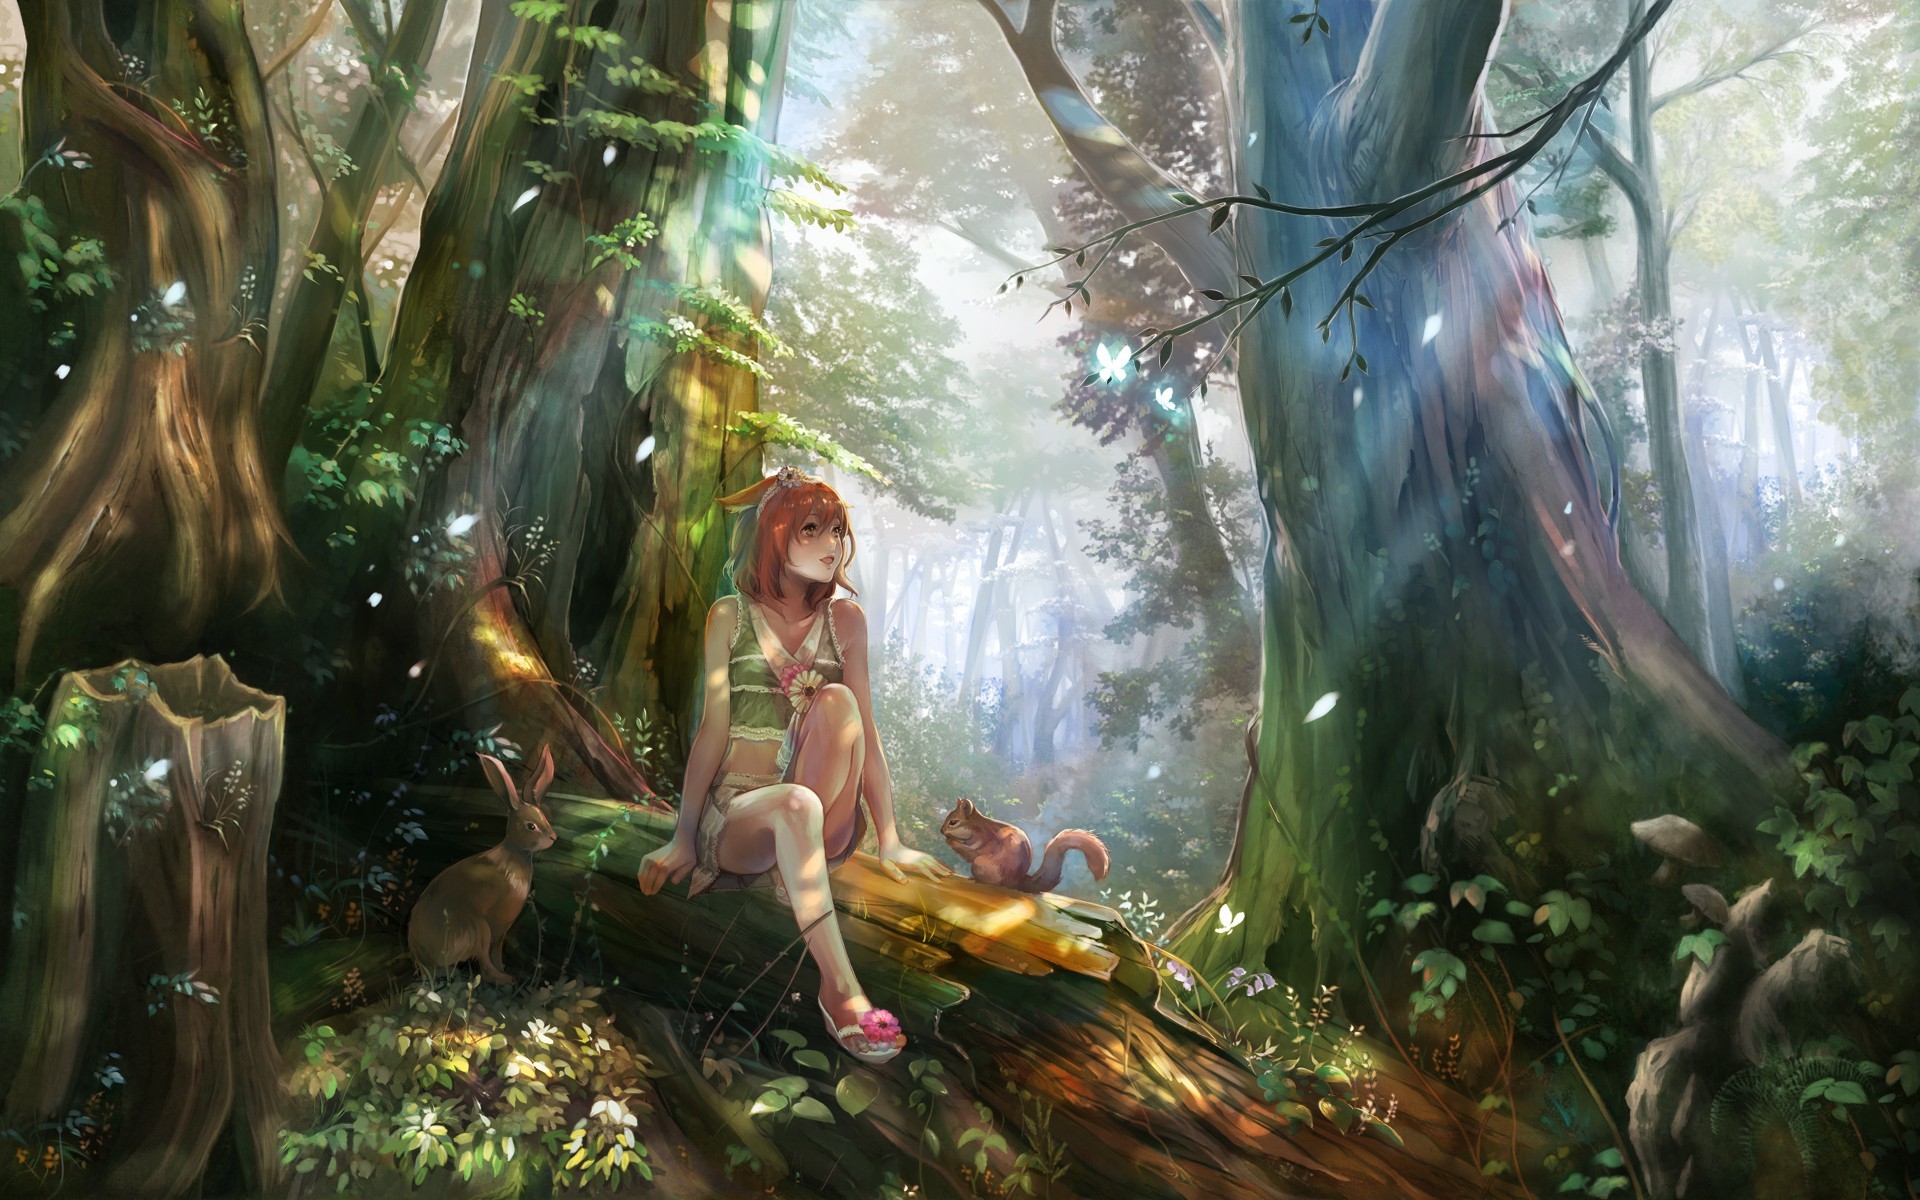 anime Girls, Forest, Nature, Fantasy Art, Forest Clearing, Elves, Redhead, Original Characters Wallpaper